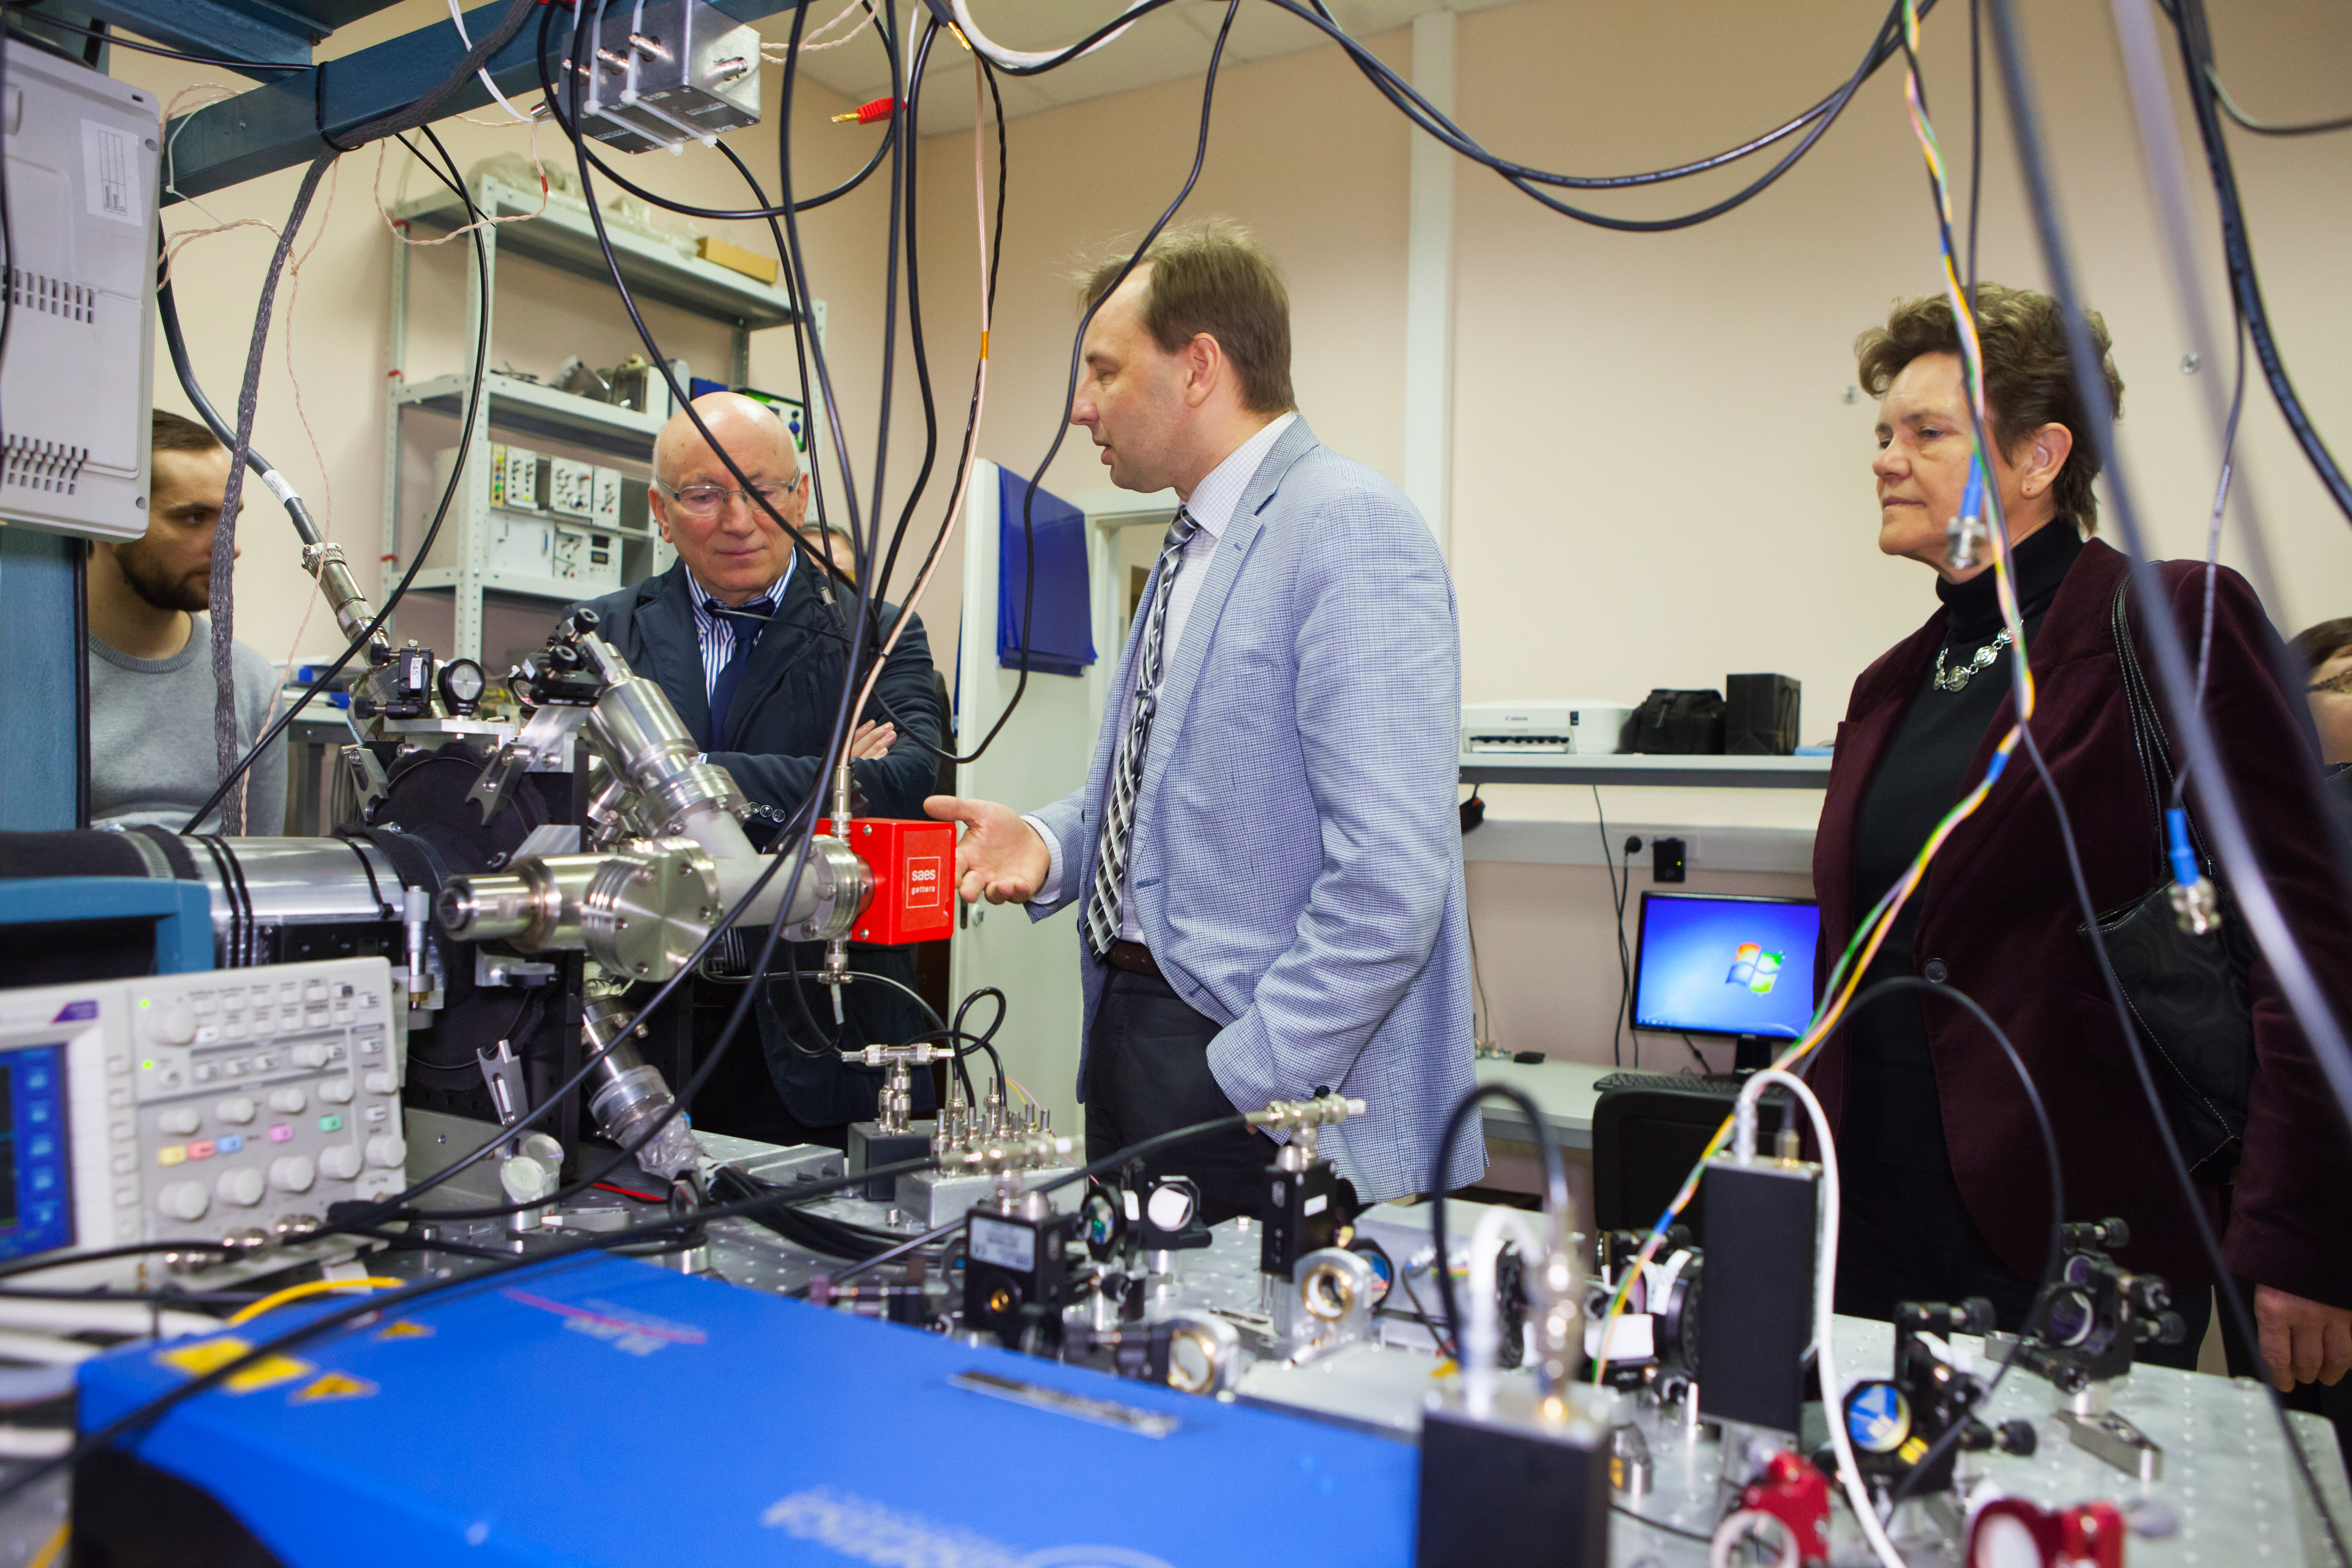 W. Ertmer visits the Lebedew physical institute